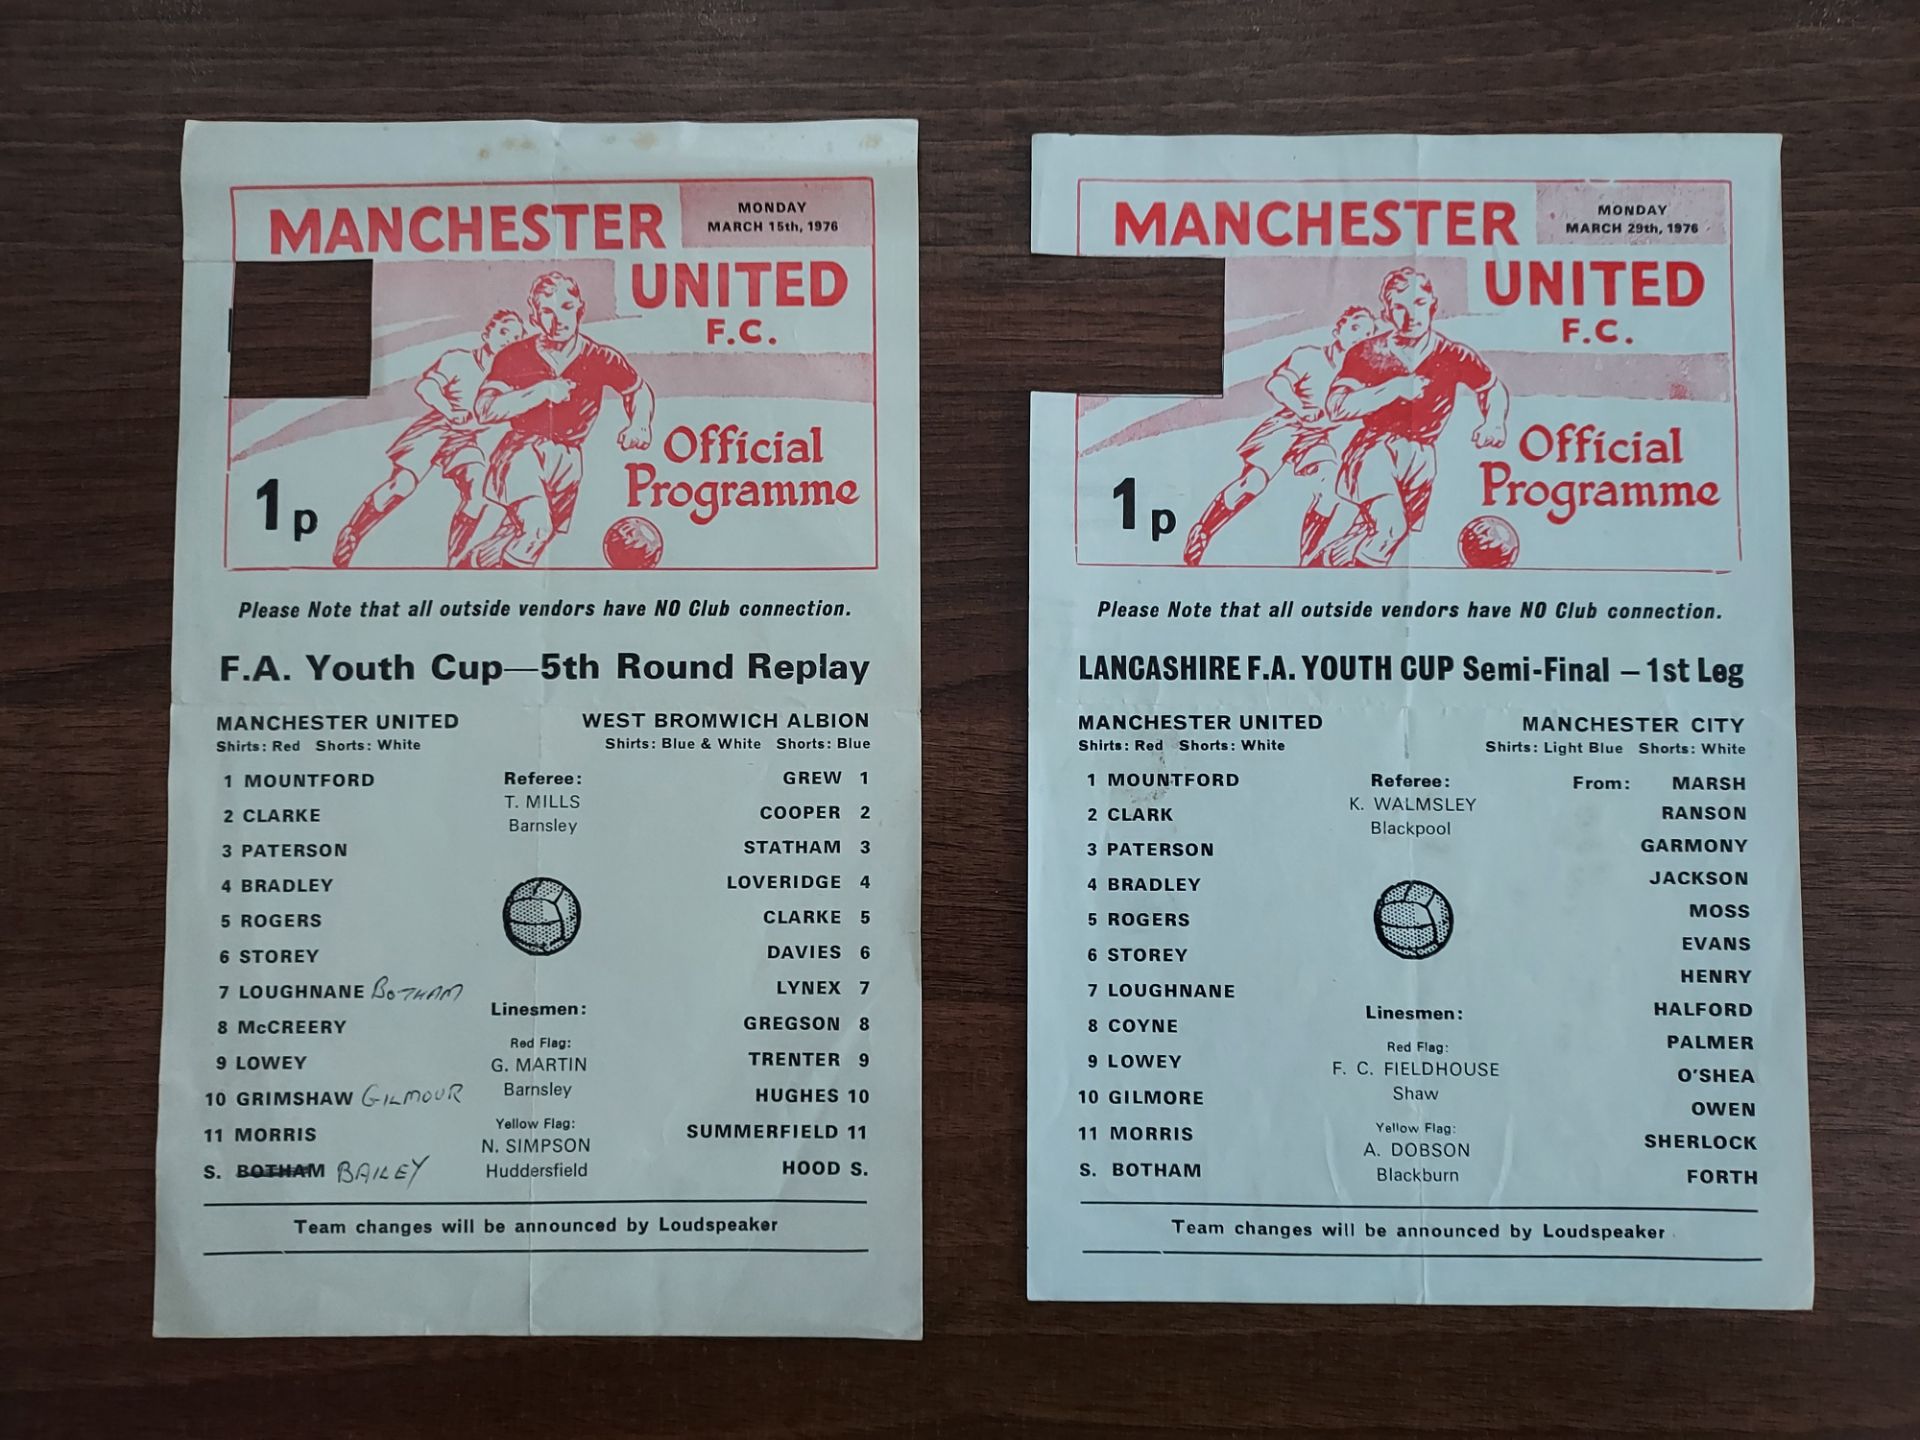 2 X MANCHESTER UNITED YOUTH CUP MATCHES TO INC - MAN CITY, WEST BROM 1975/76